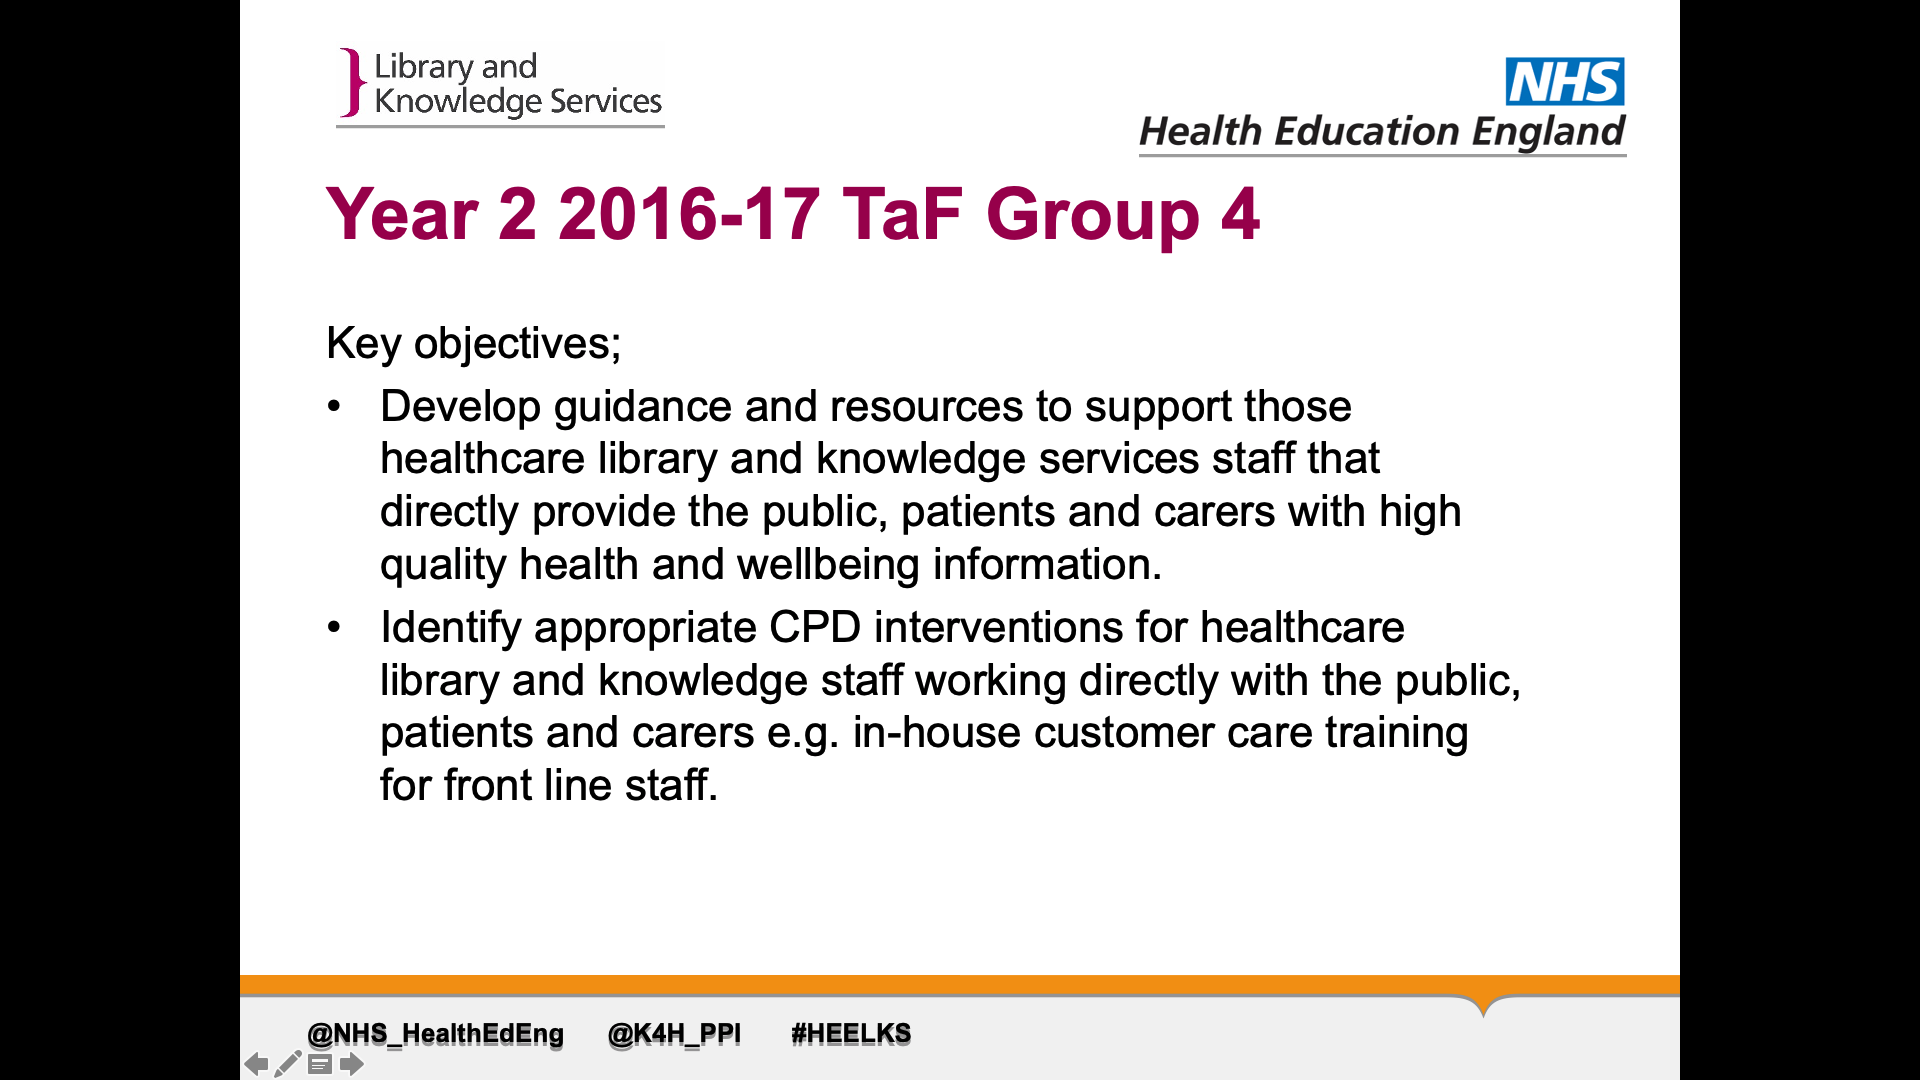 Title: Year 2 2016-17 TaF Group 4 Text on page: Key objectives; Develop guidance and resources to support those healthcare library and knowledge services staff that directly provide the public, patients and carers with high quality health and wellbeing information. Identify appropriate CPD interventions for healthcare library and knowledge staff working directly with the public, patients and carers e.g. in-house customer care training for front line staff.